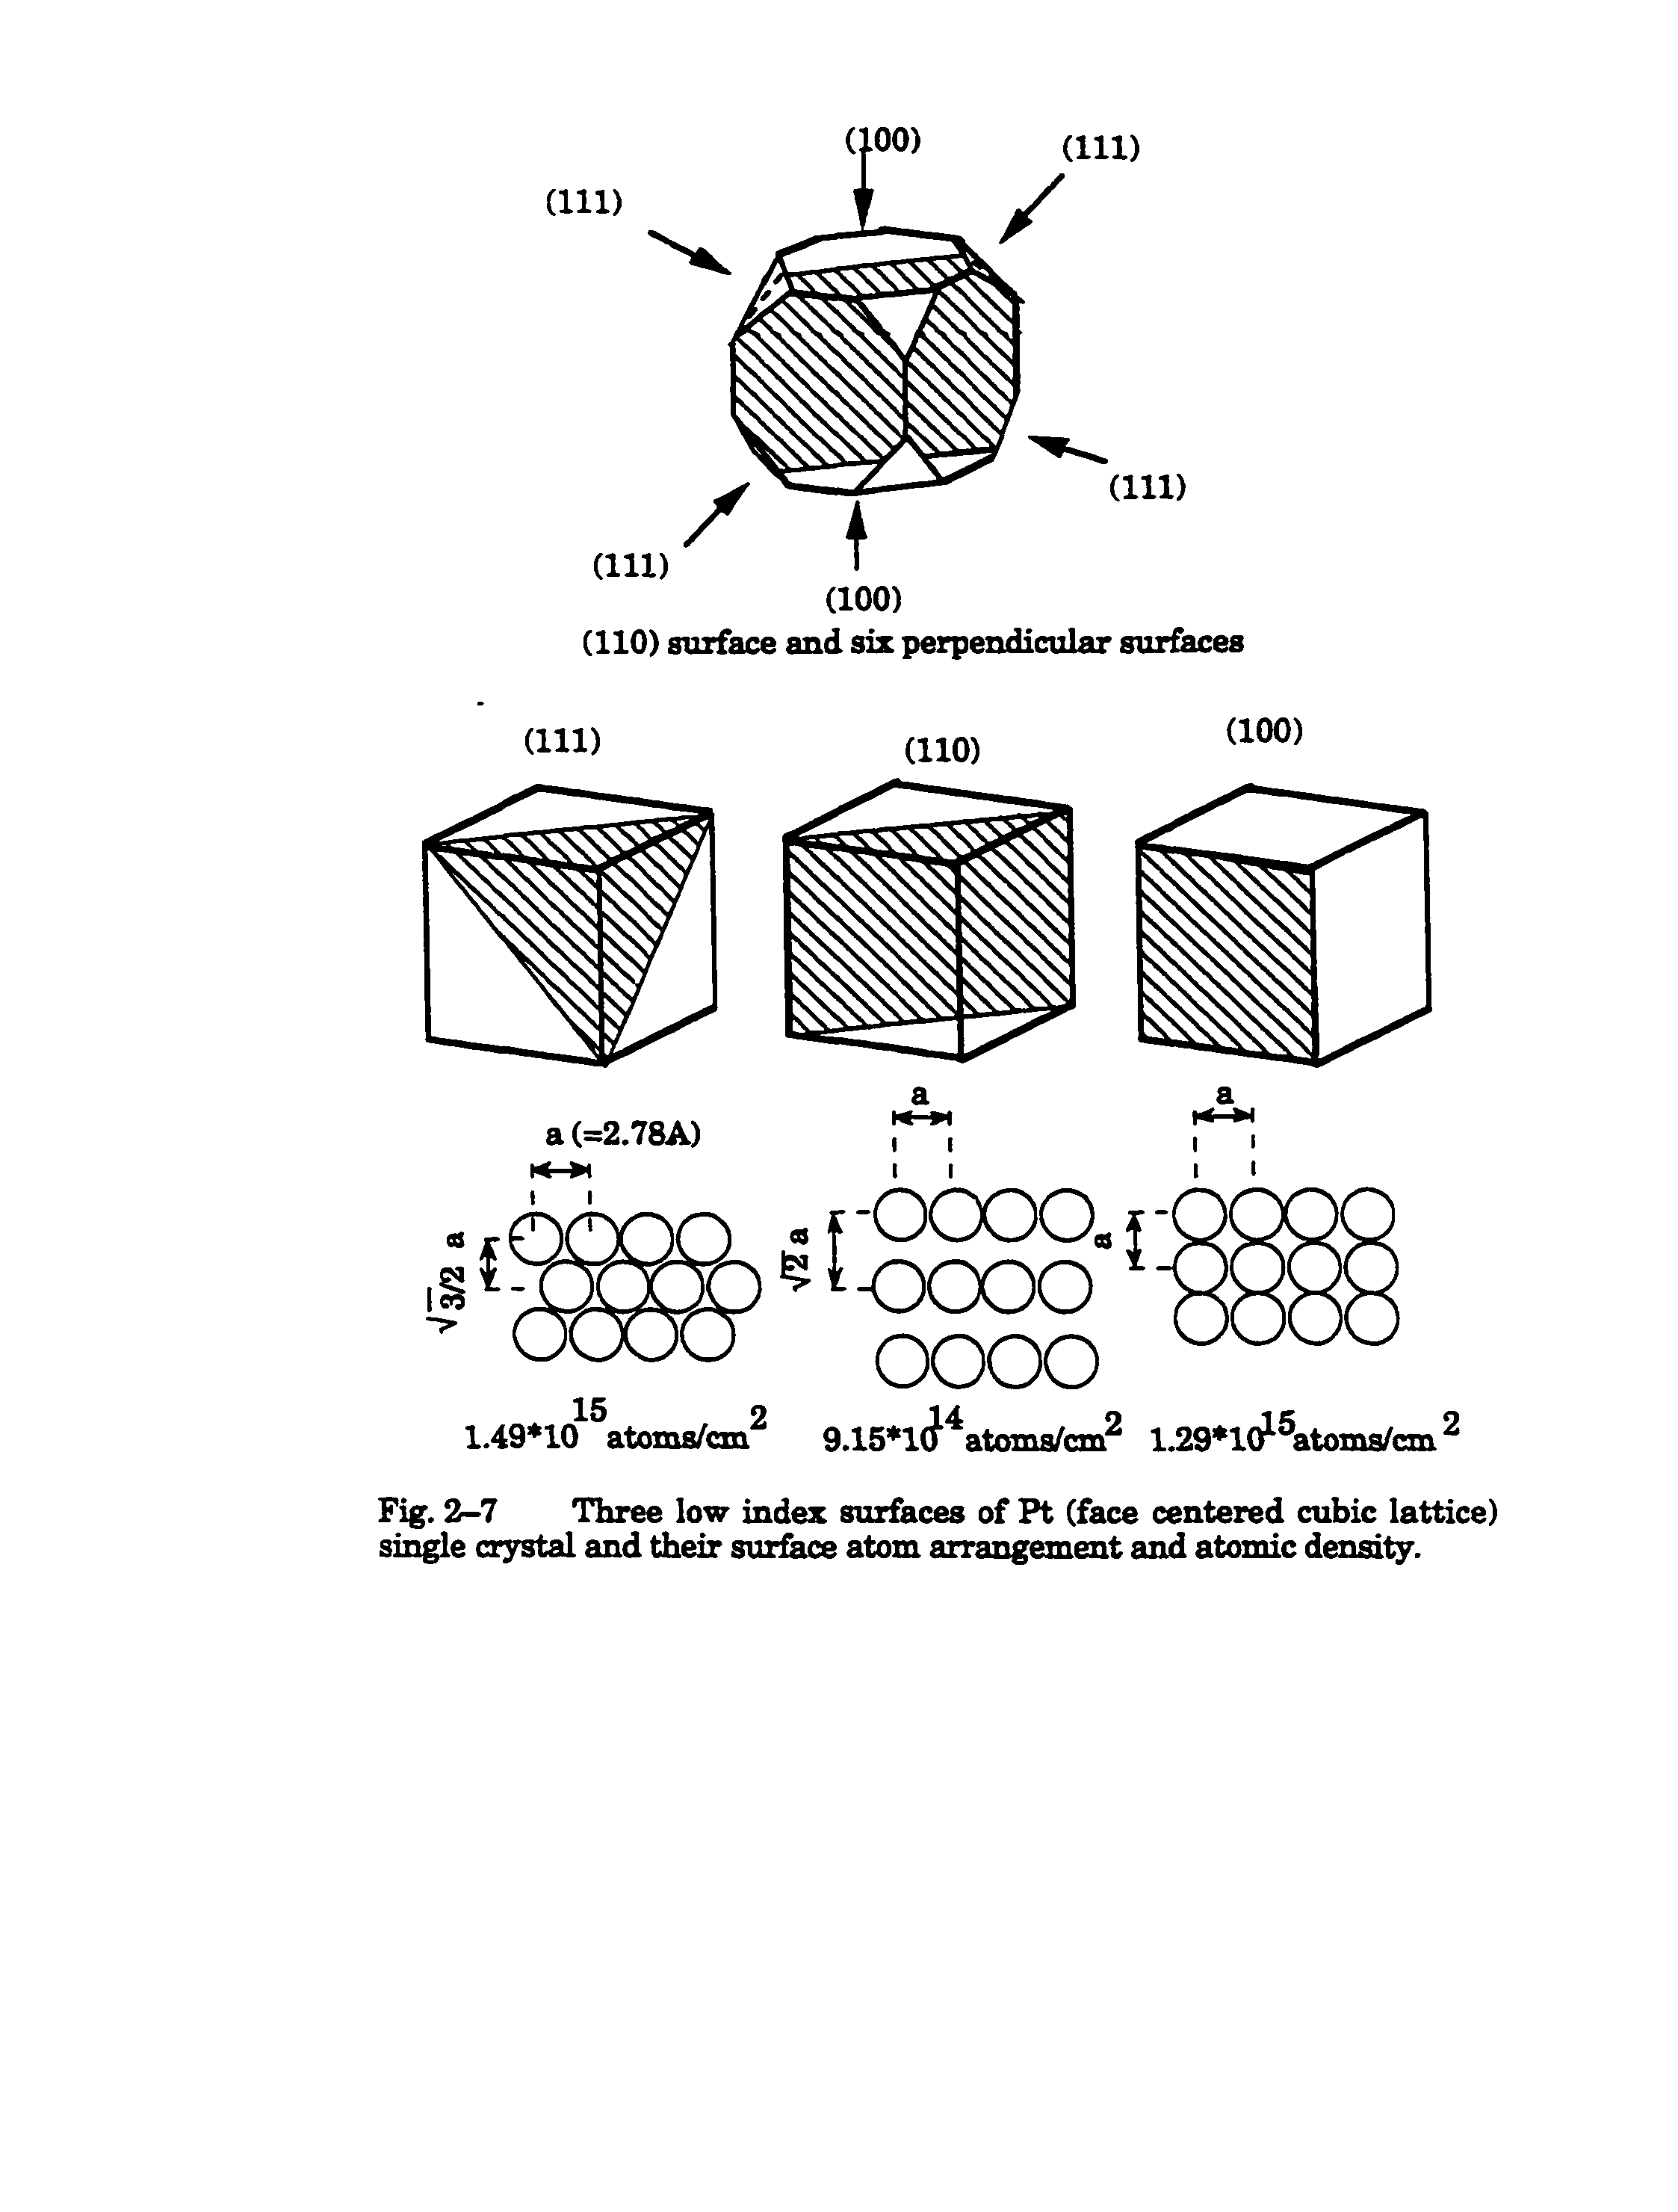 Fig. 2-7 Three low index surfaces of Pt (face centered cubic lattice) si e crystal and their surface atom arrangement and atomic density.